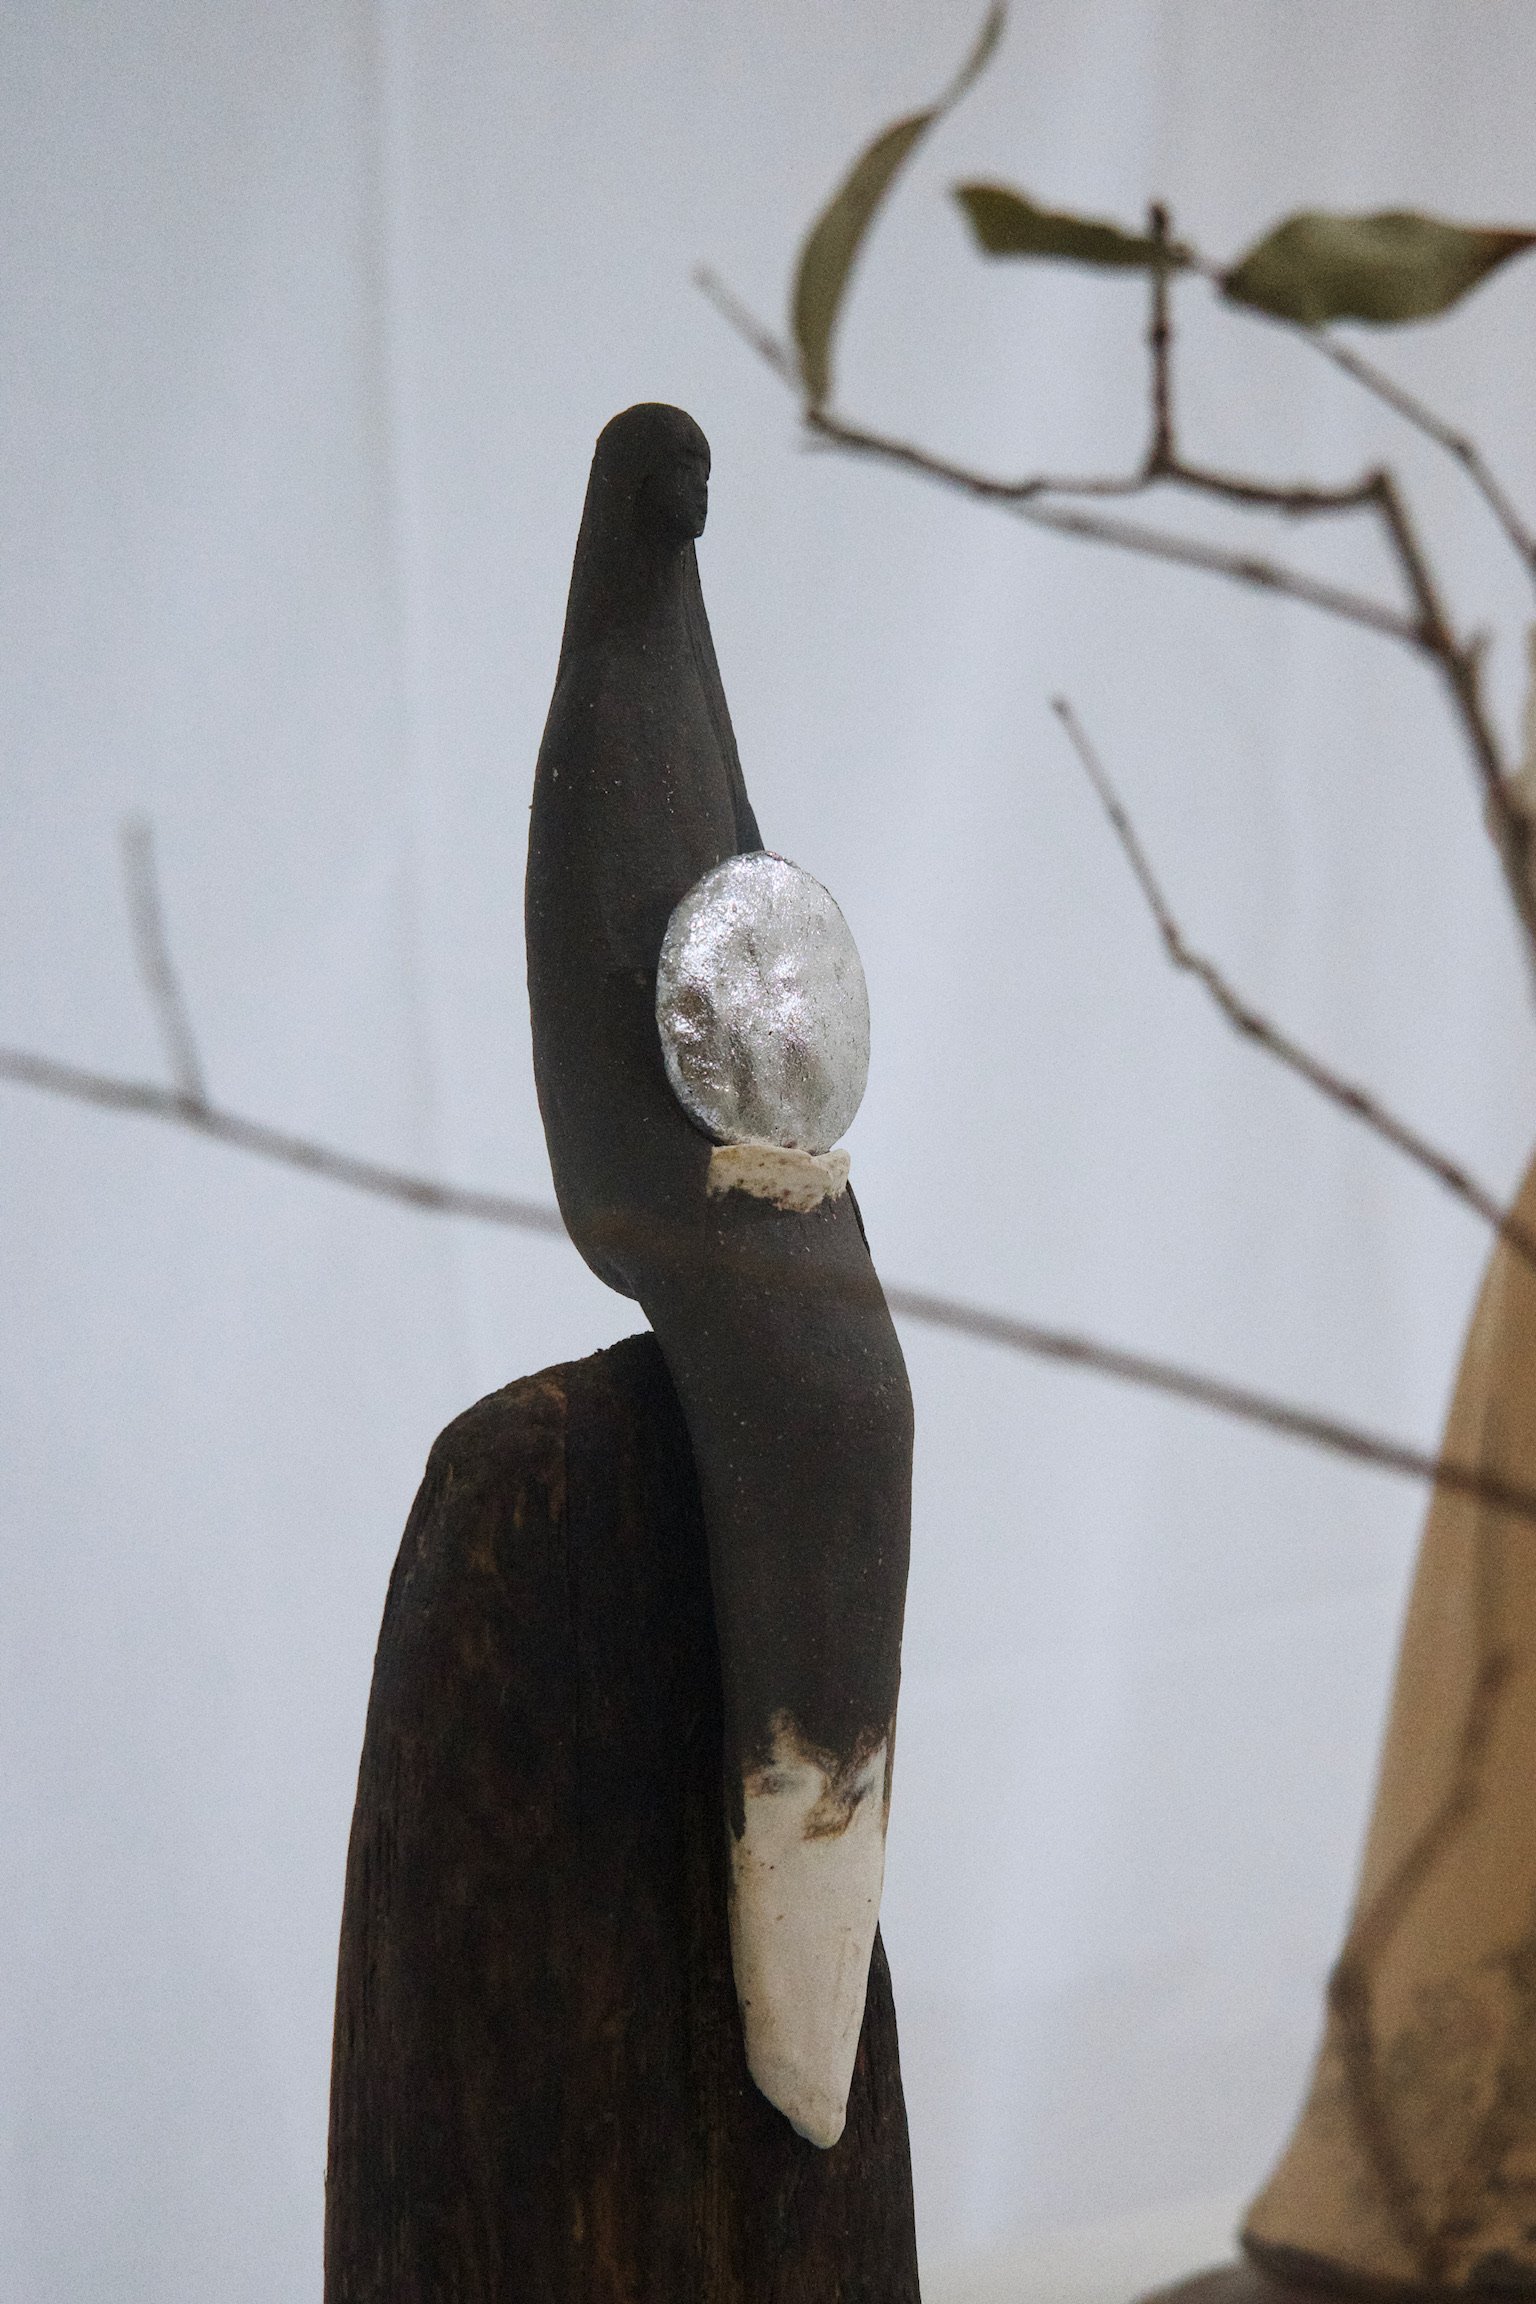 Sculpture of a slender woman holding a silver disc sitting atop of a wooden block.